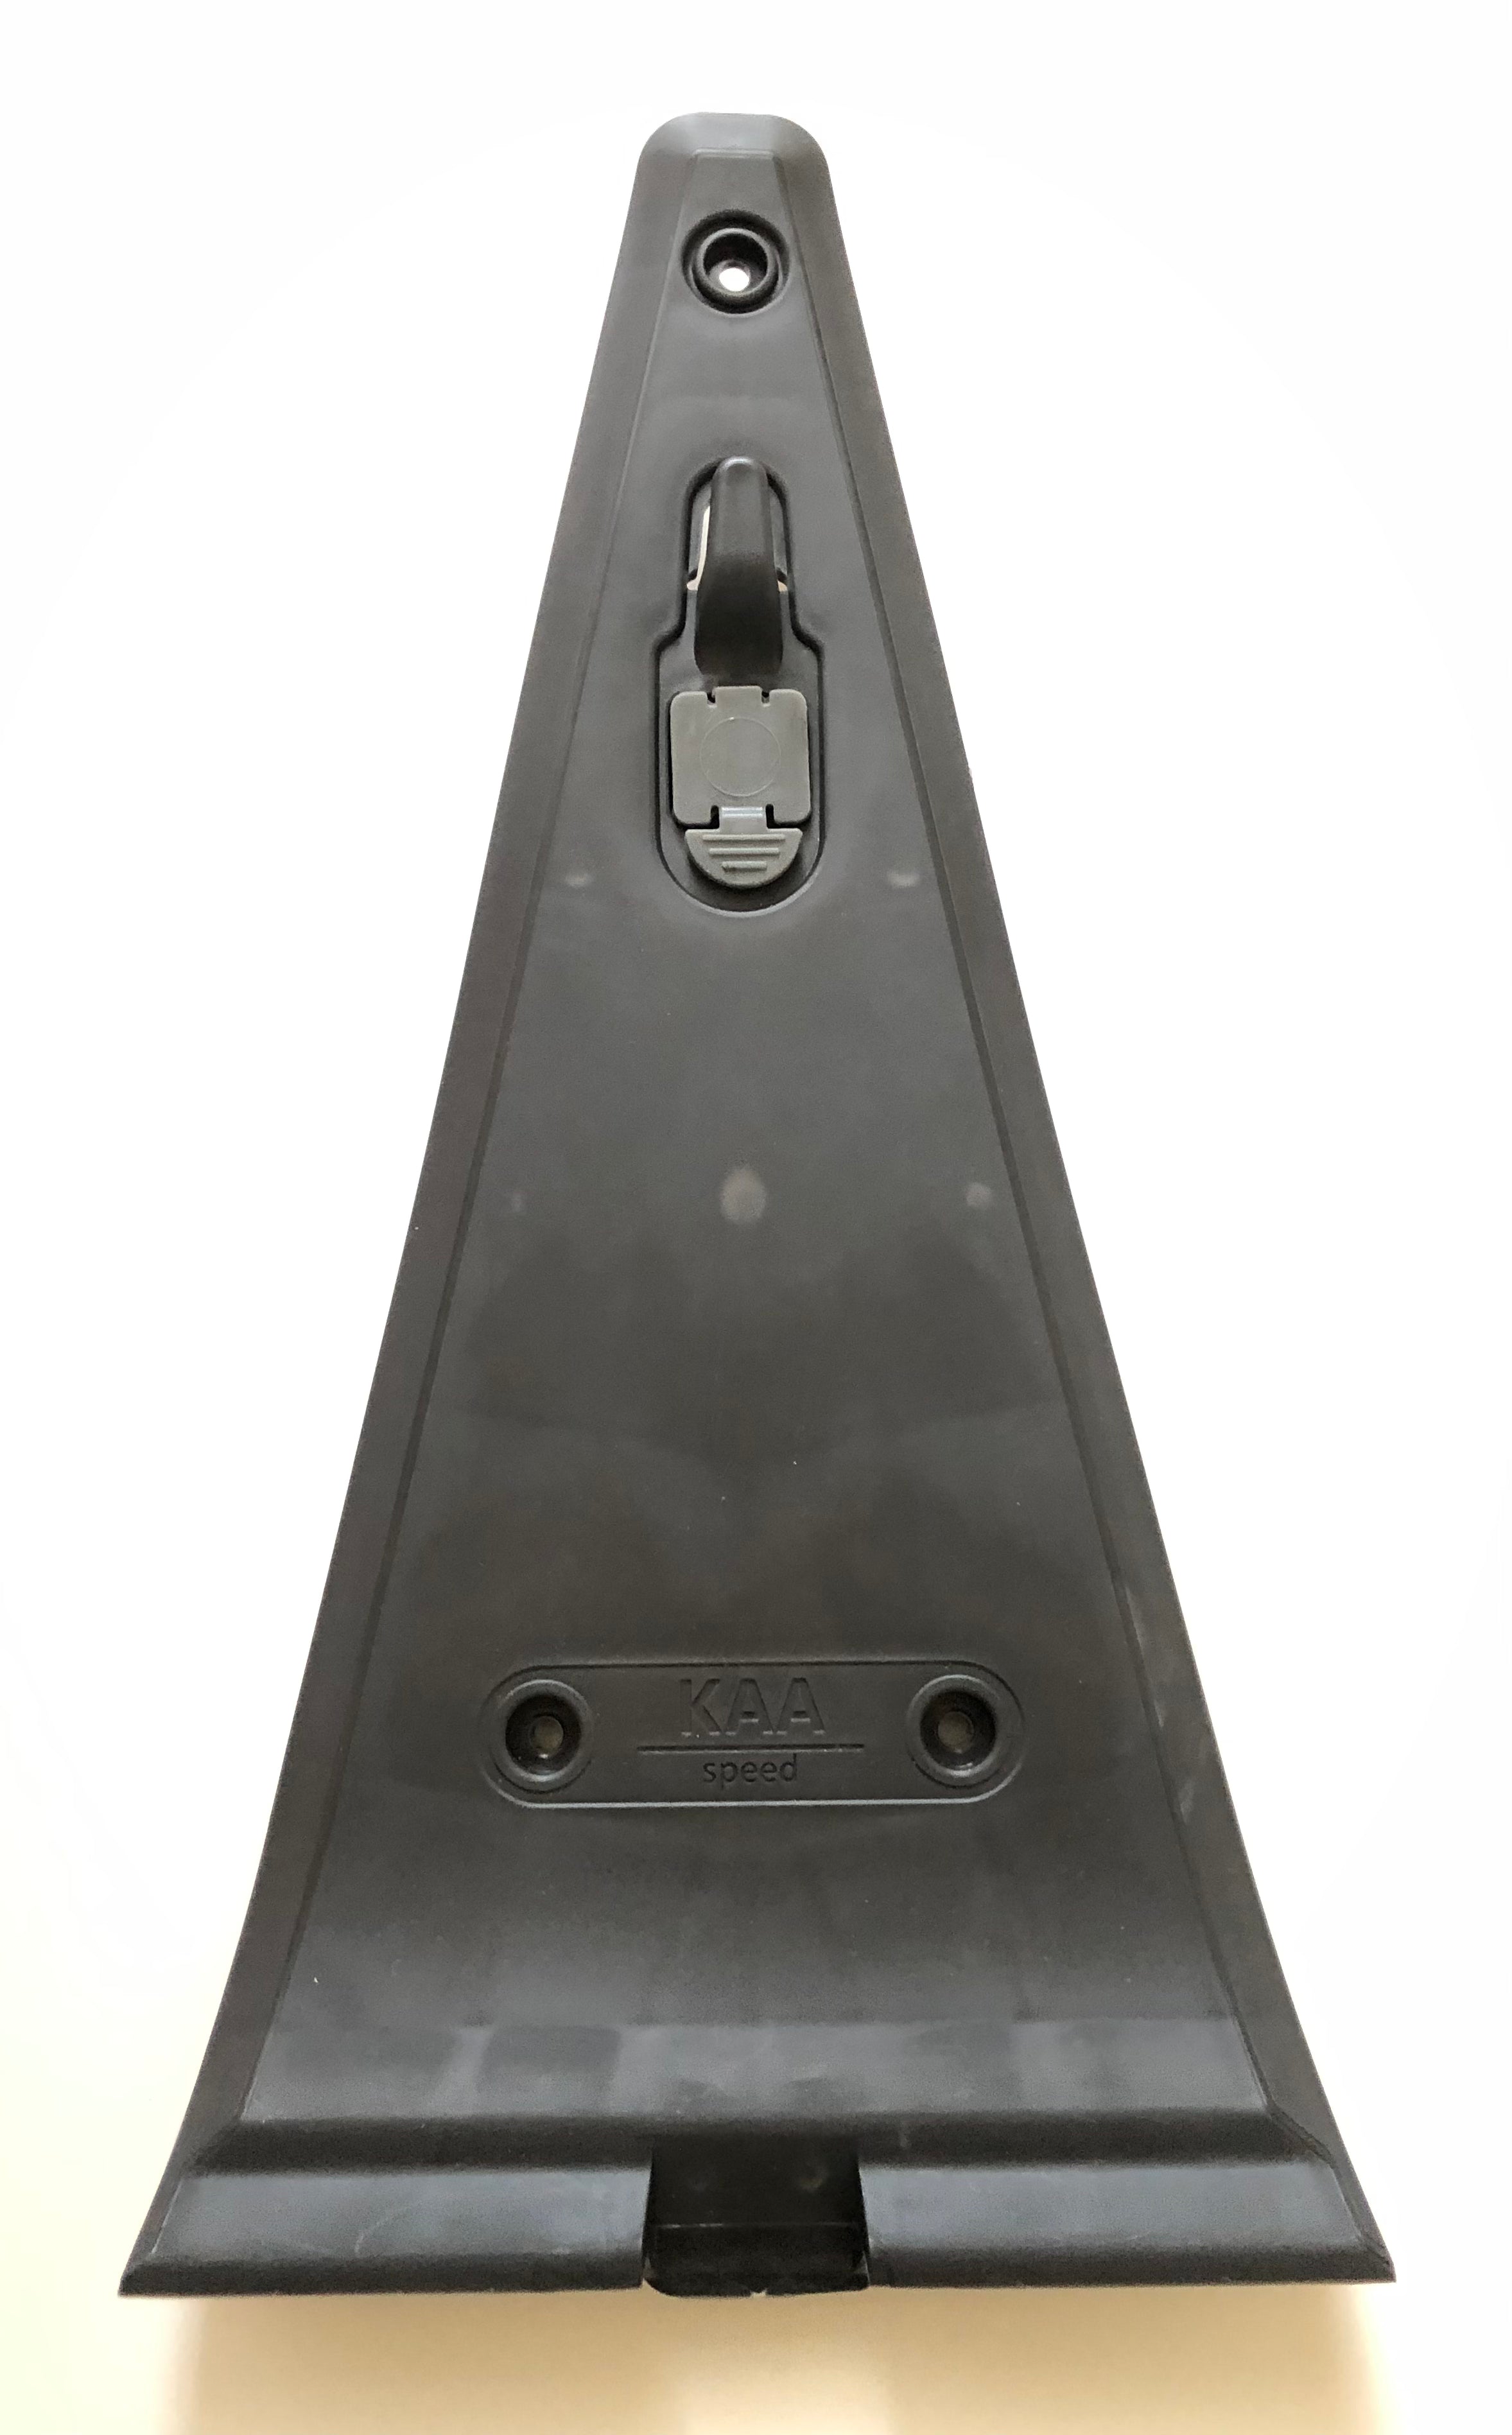 Kaaspeed Scooter Triangle Cover